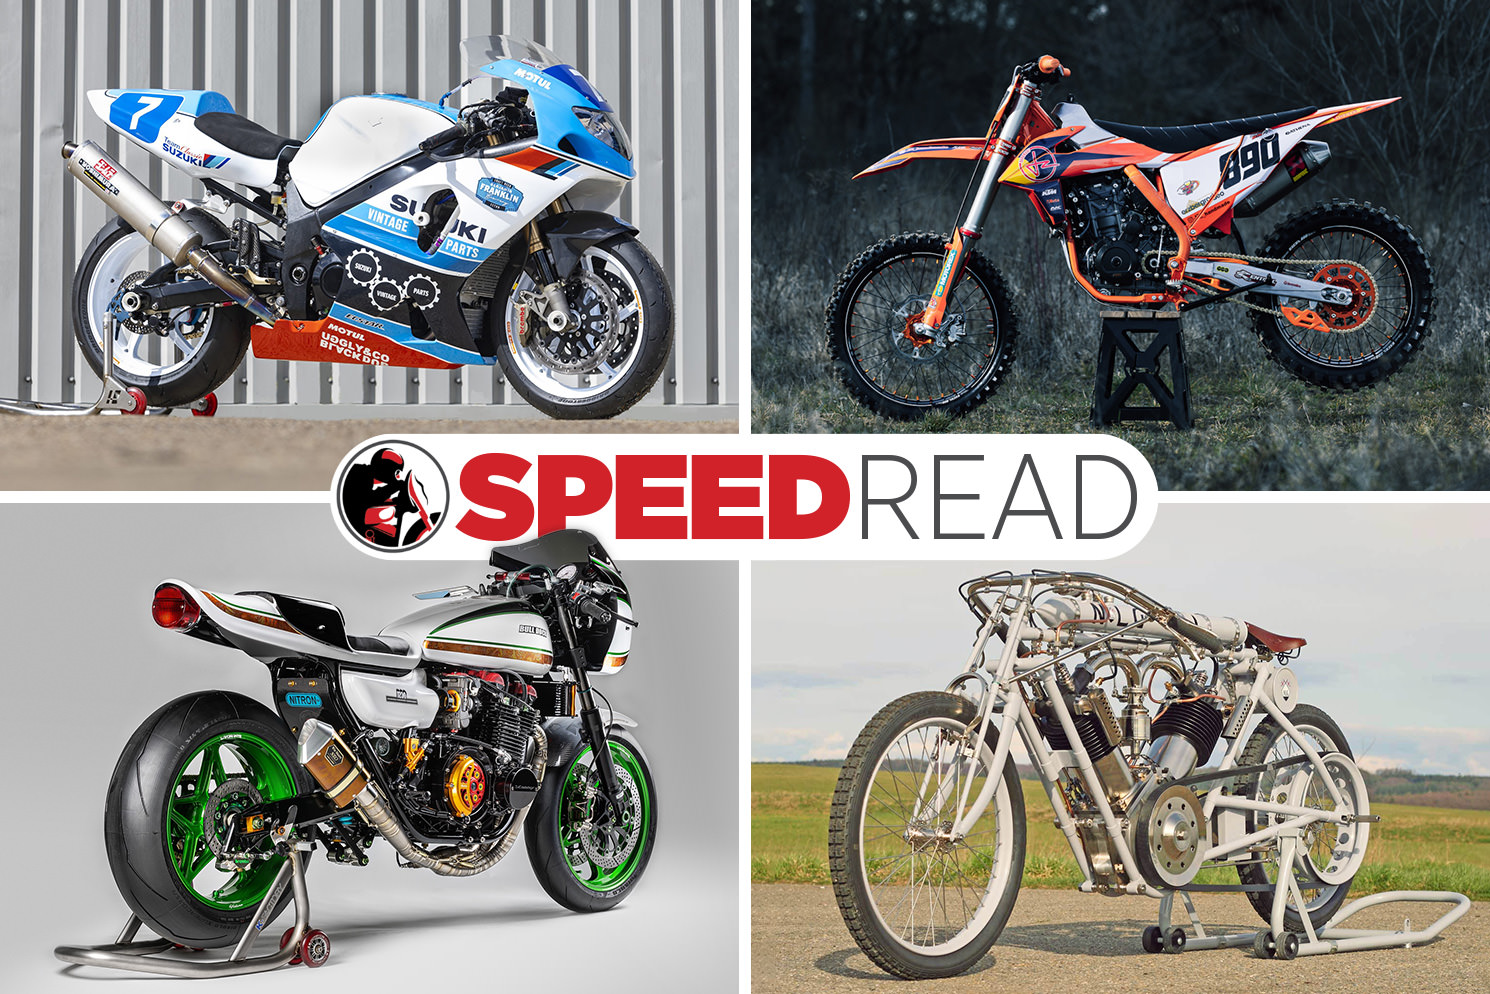 The latest motorcycle news, customs and race bikes.